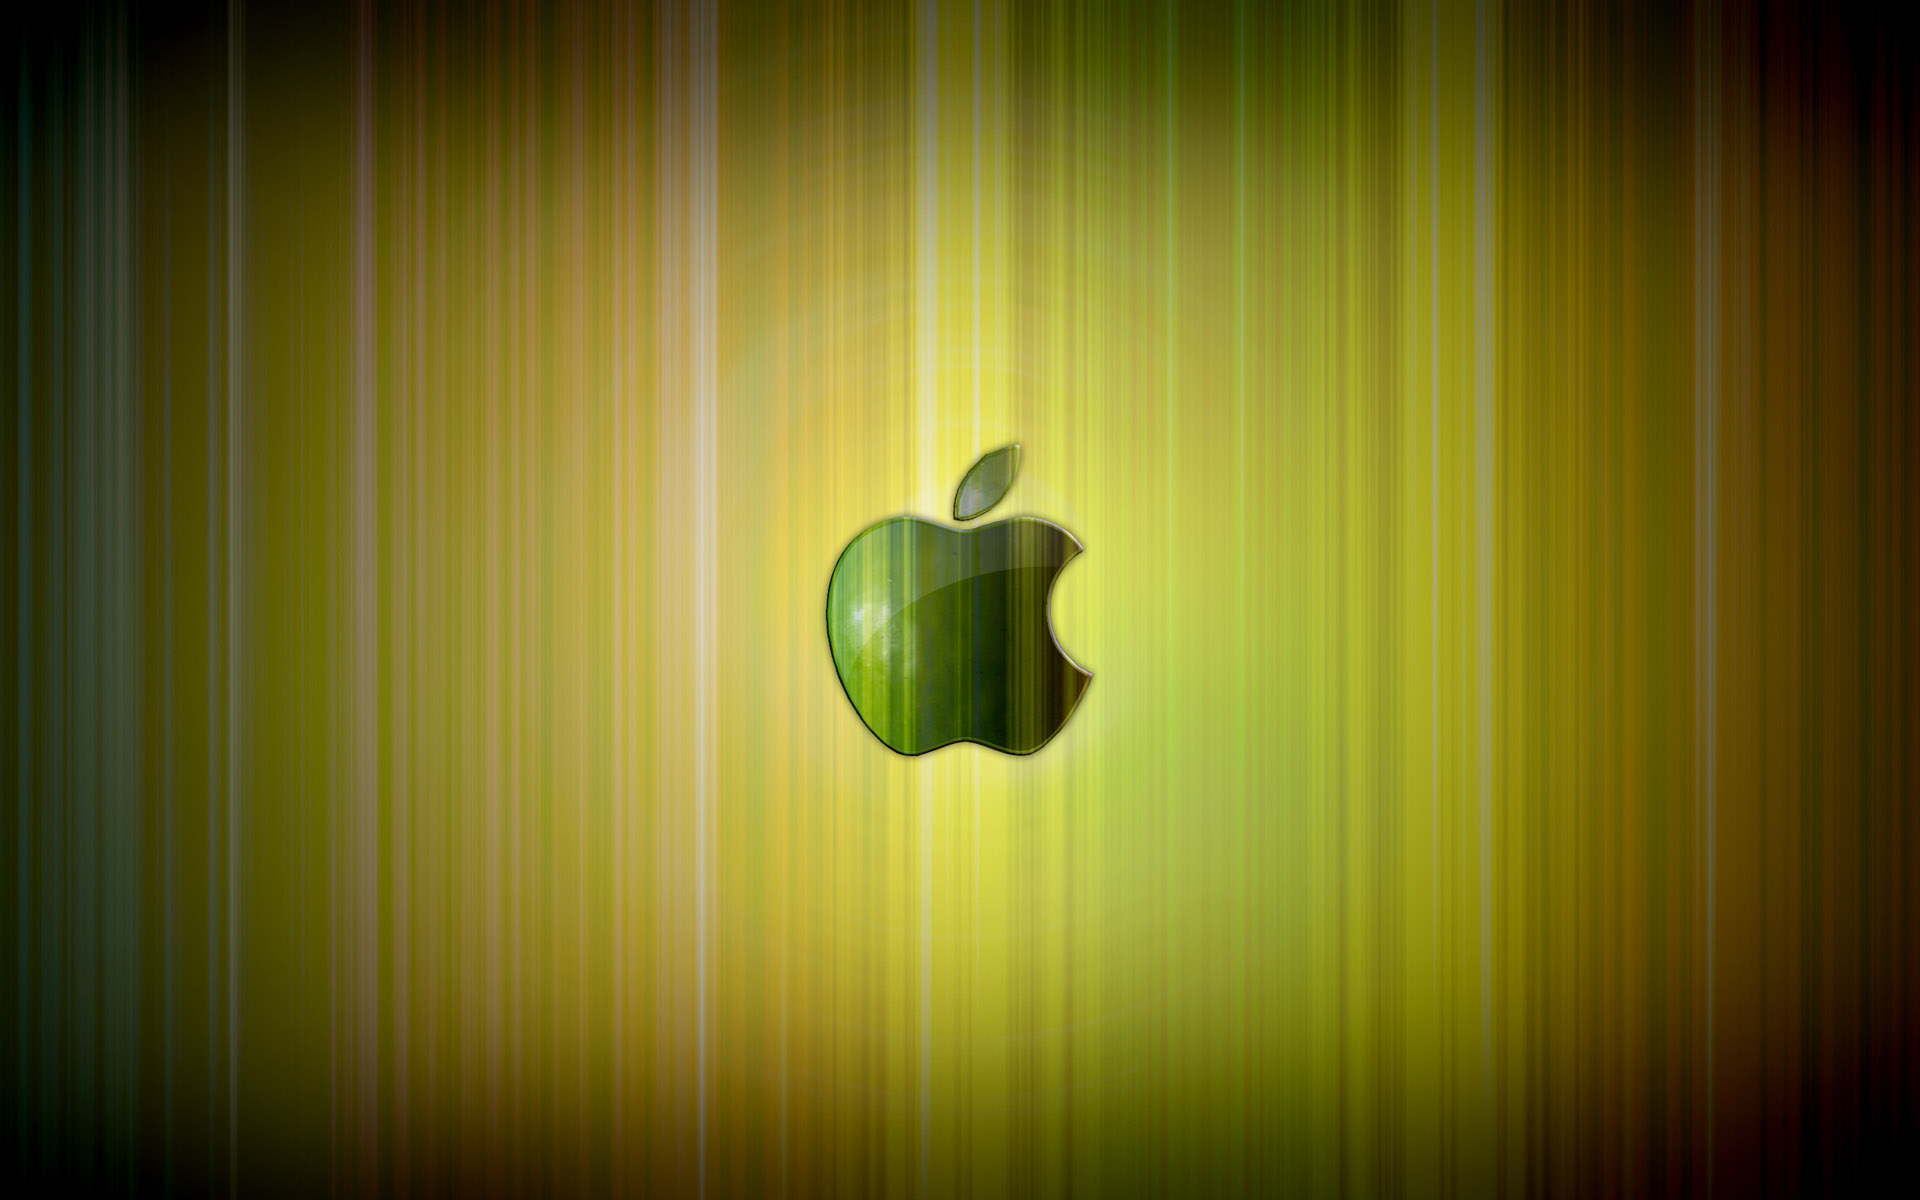 A Green Apple Logo in the Central Part, Background is Bright and ...